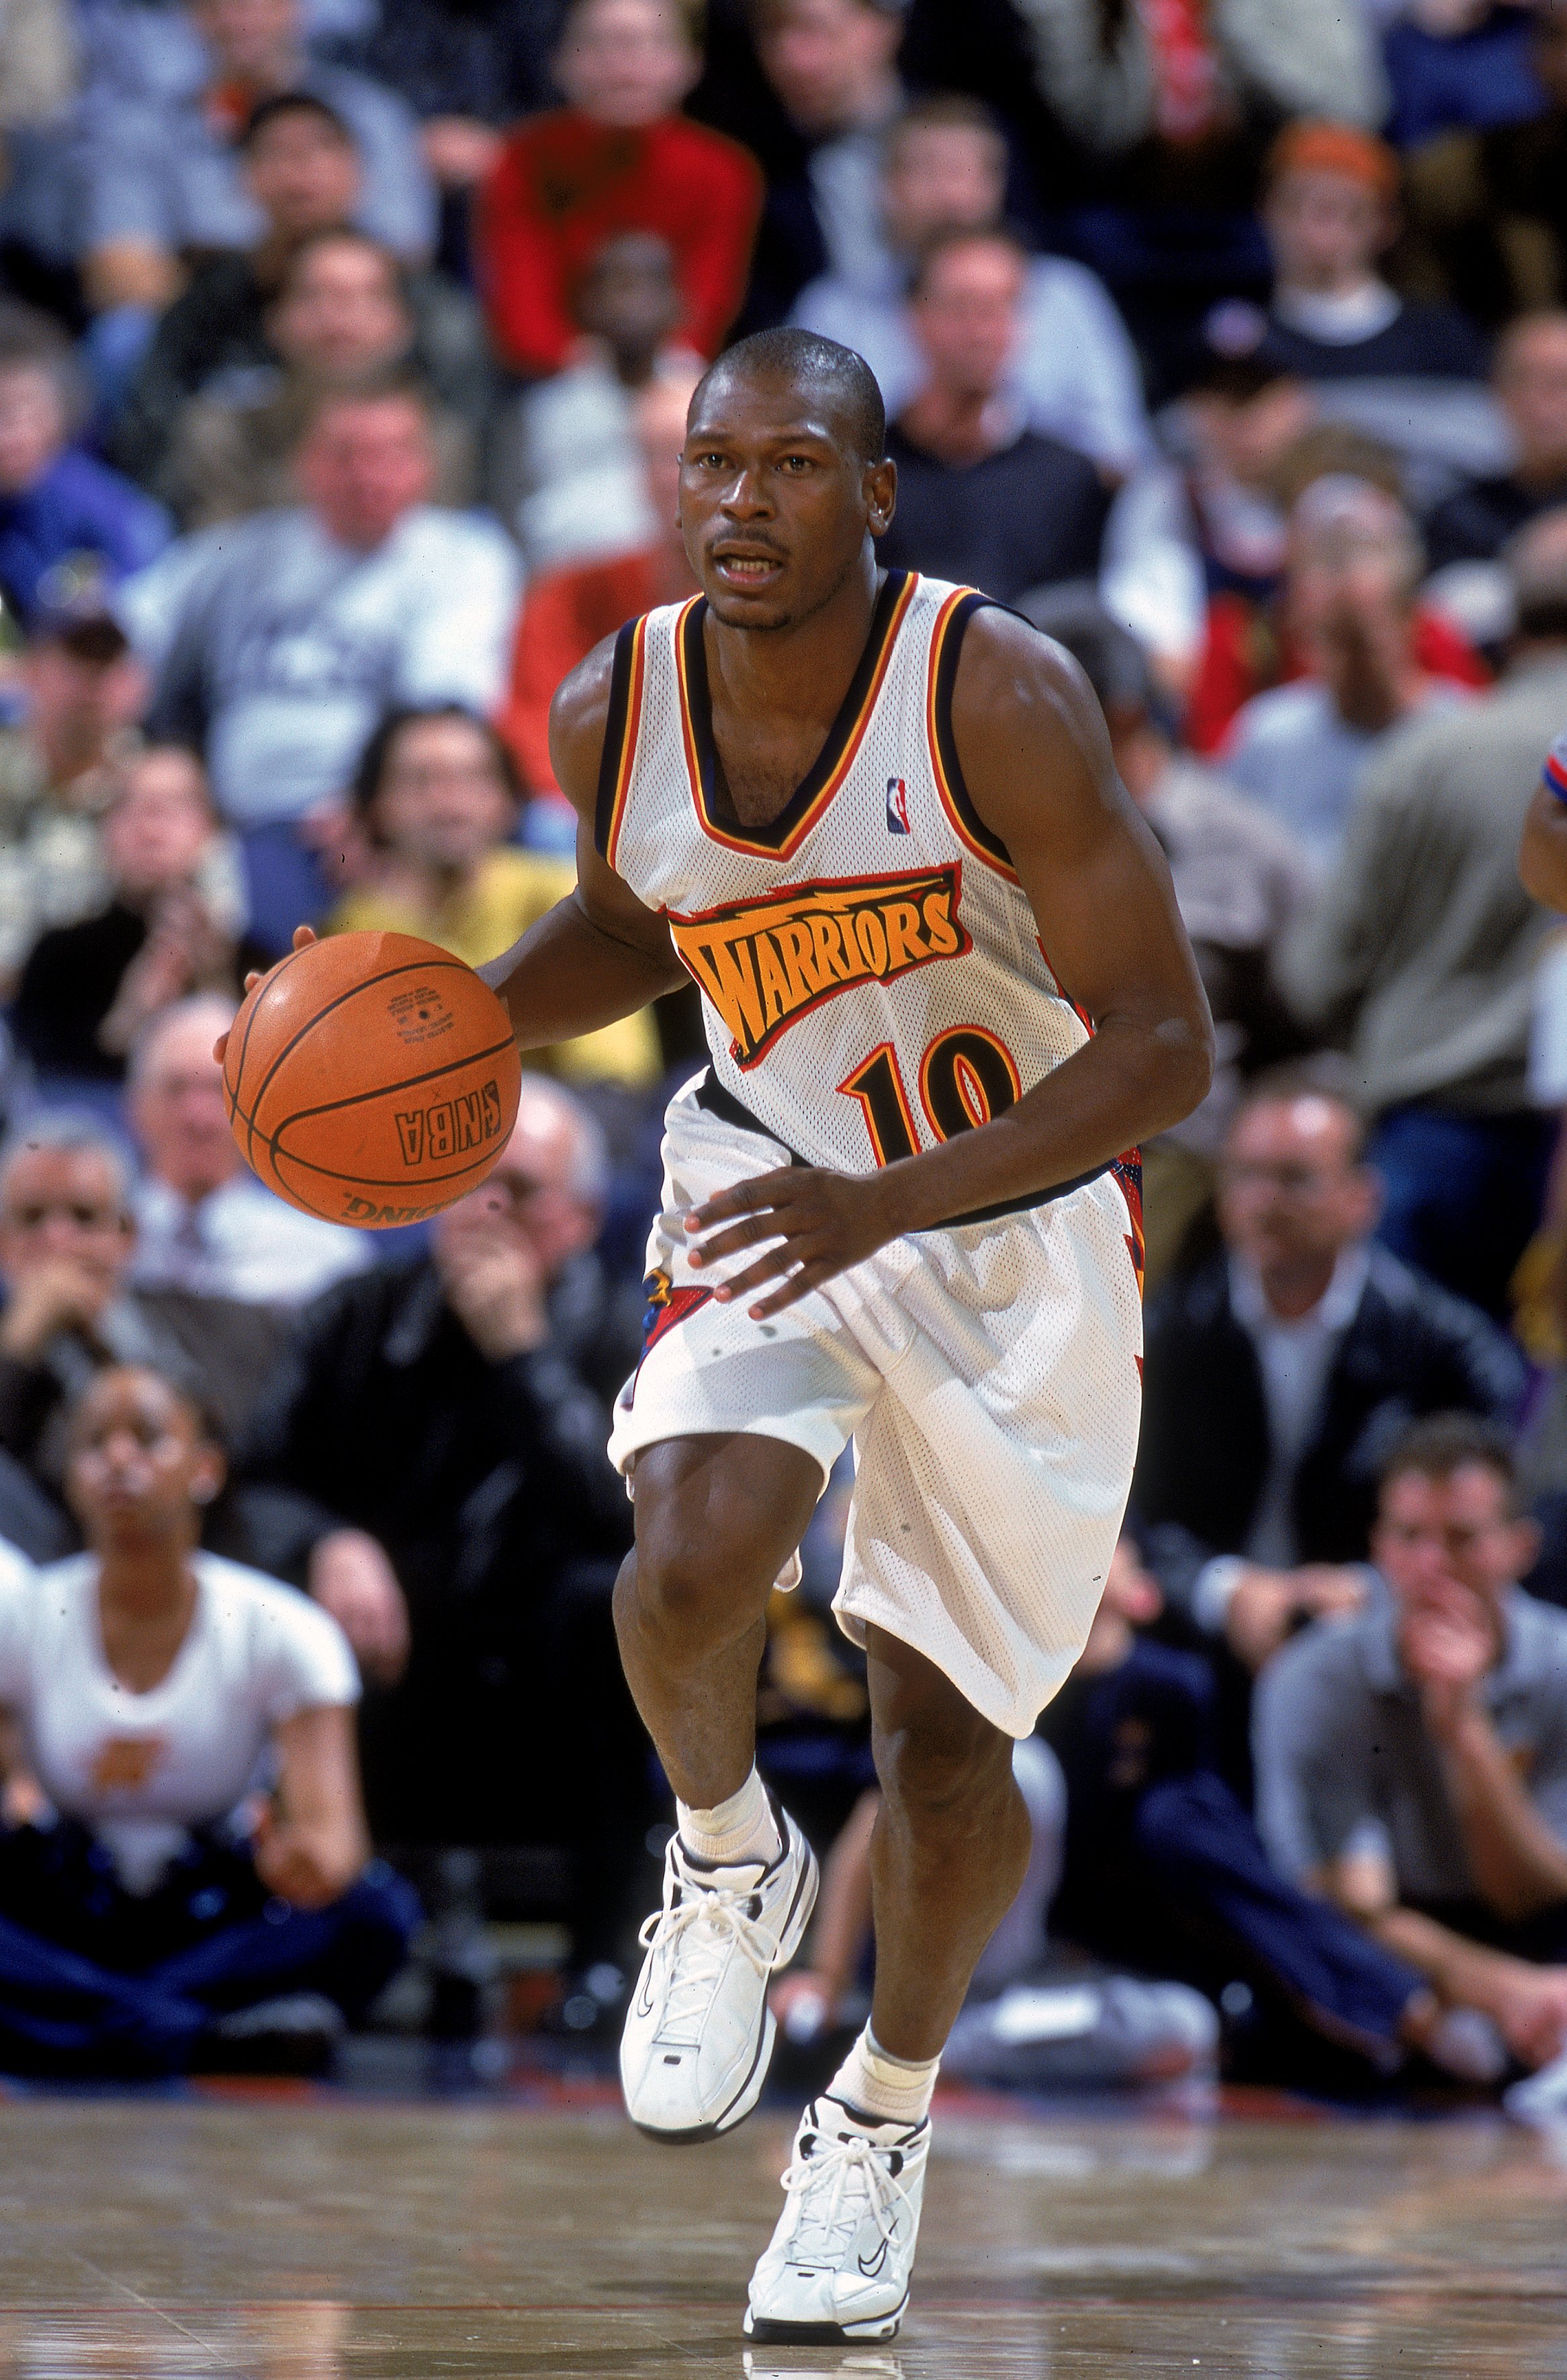 6 Dec 2000:  Mookie Blaylock #10 of the Golden State Warriors dribbles the ball down the court during the game against the Los Angeles Lakers at the Arena in Oakland in Oakland, California. The Warriors defeated the Lakers 125-122. NOTE TO USER: It is exp